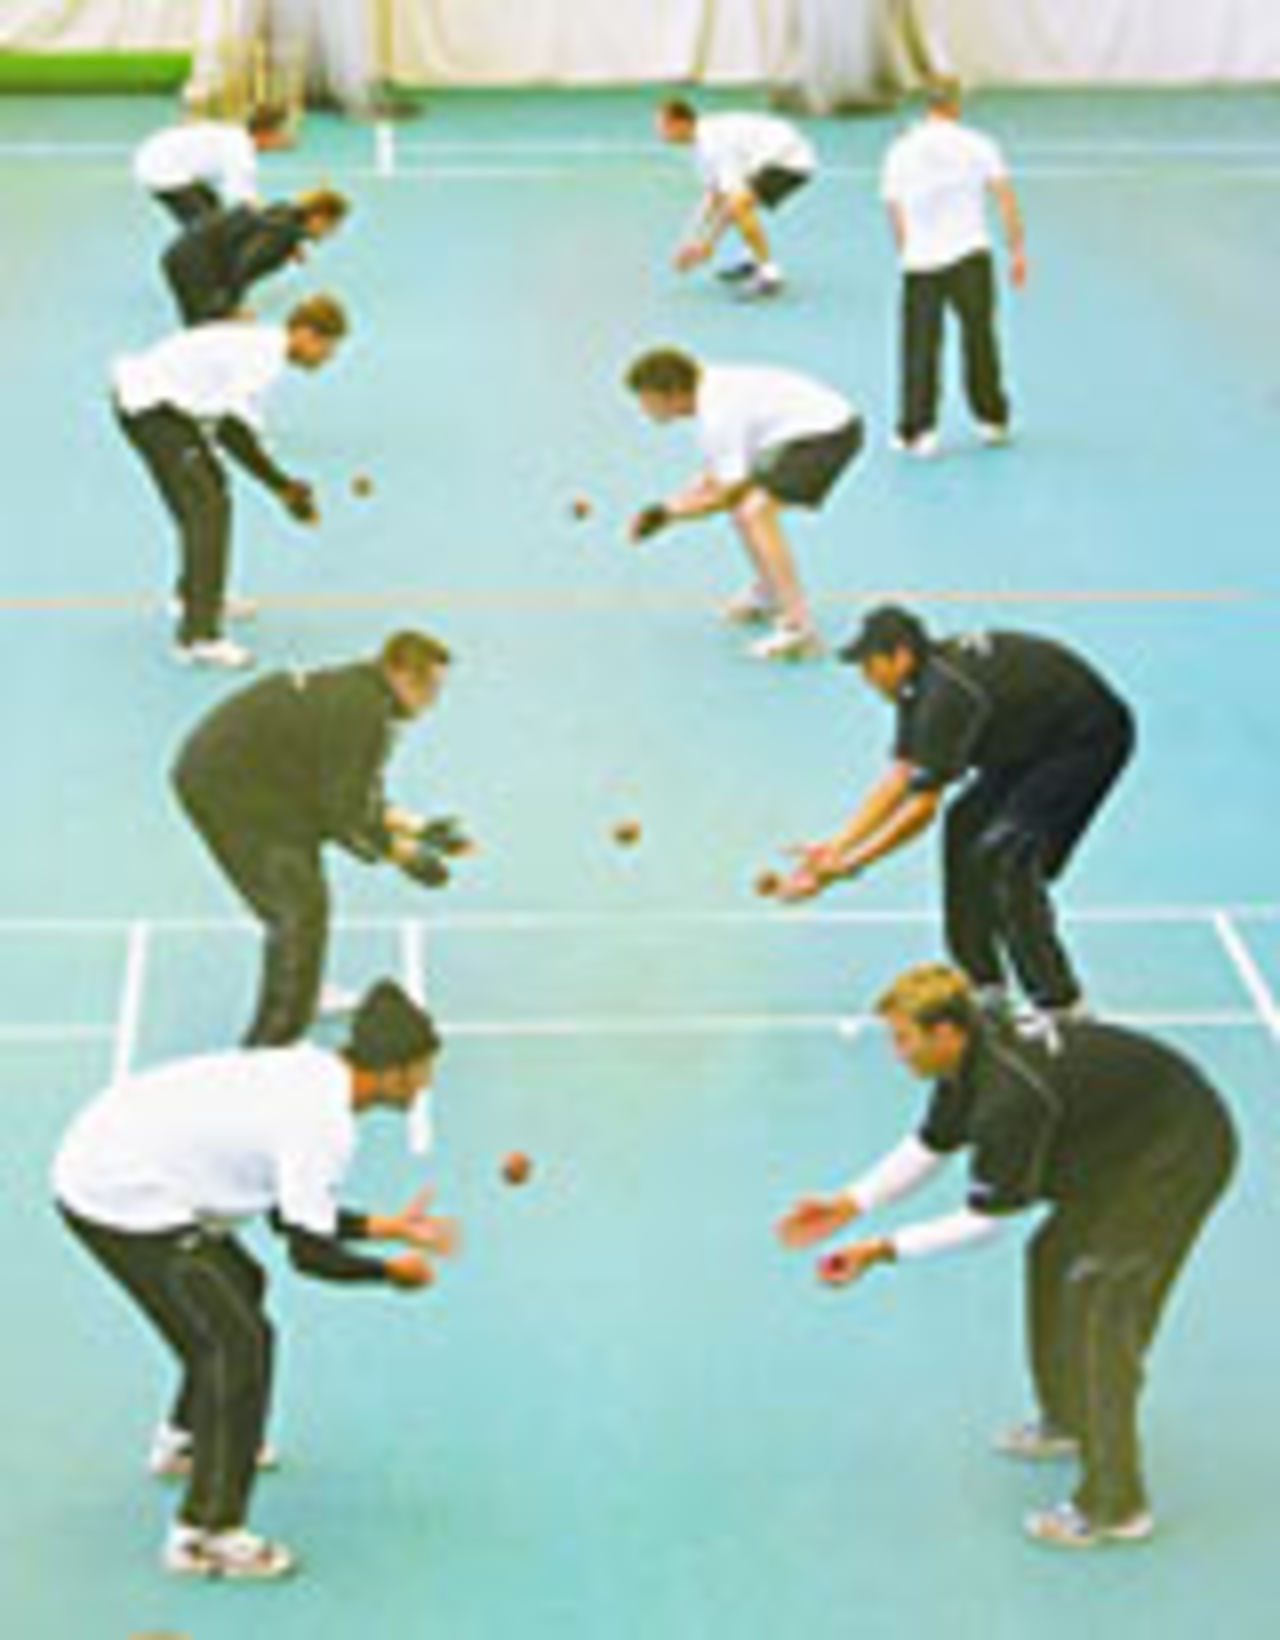 New Zealand players practice at Lords, April 30, 2004